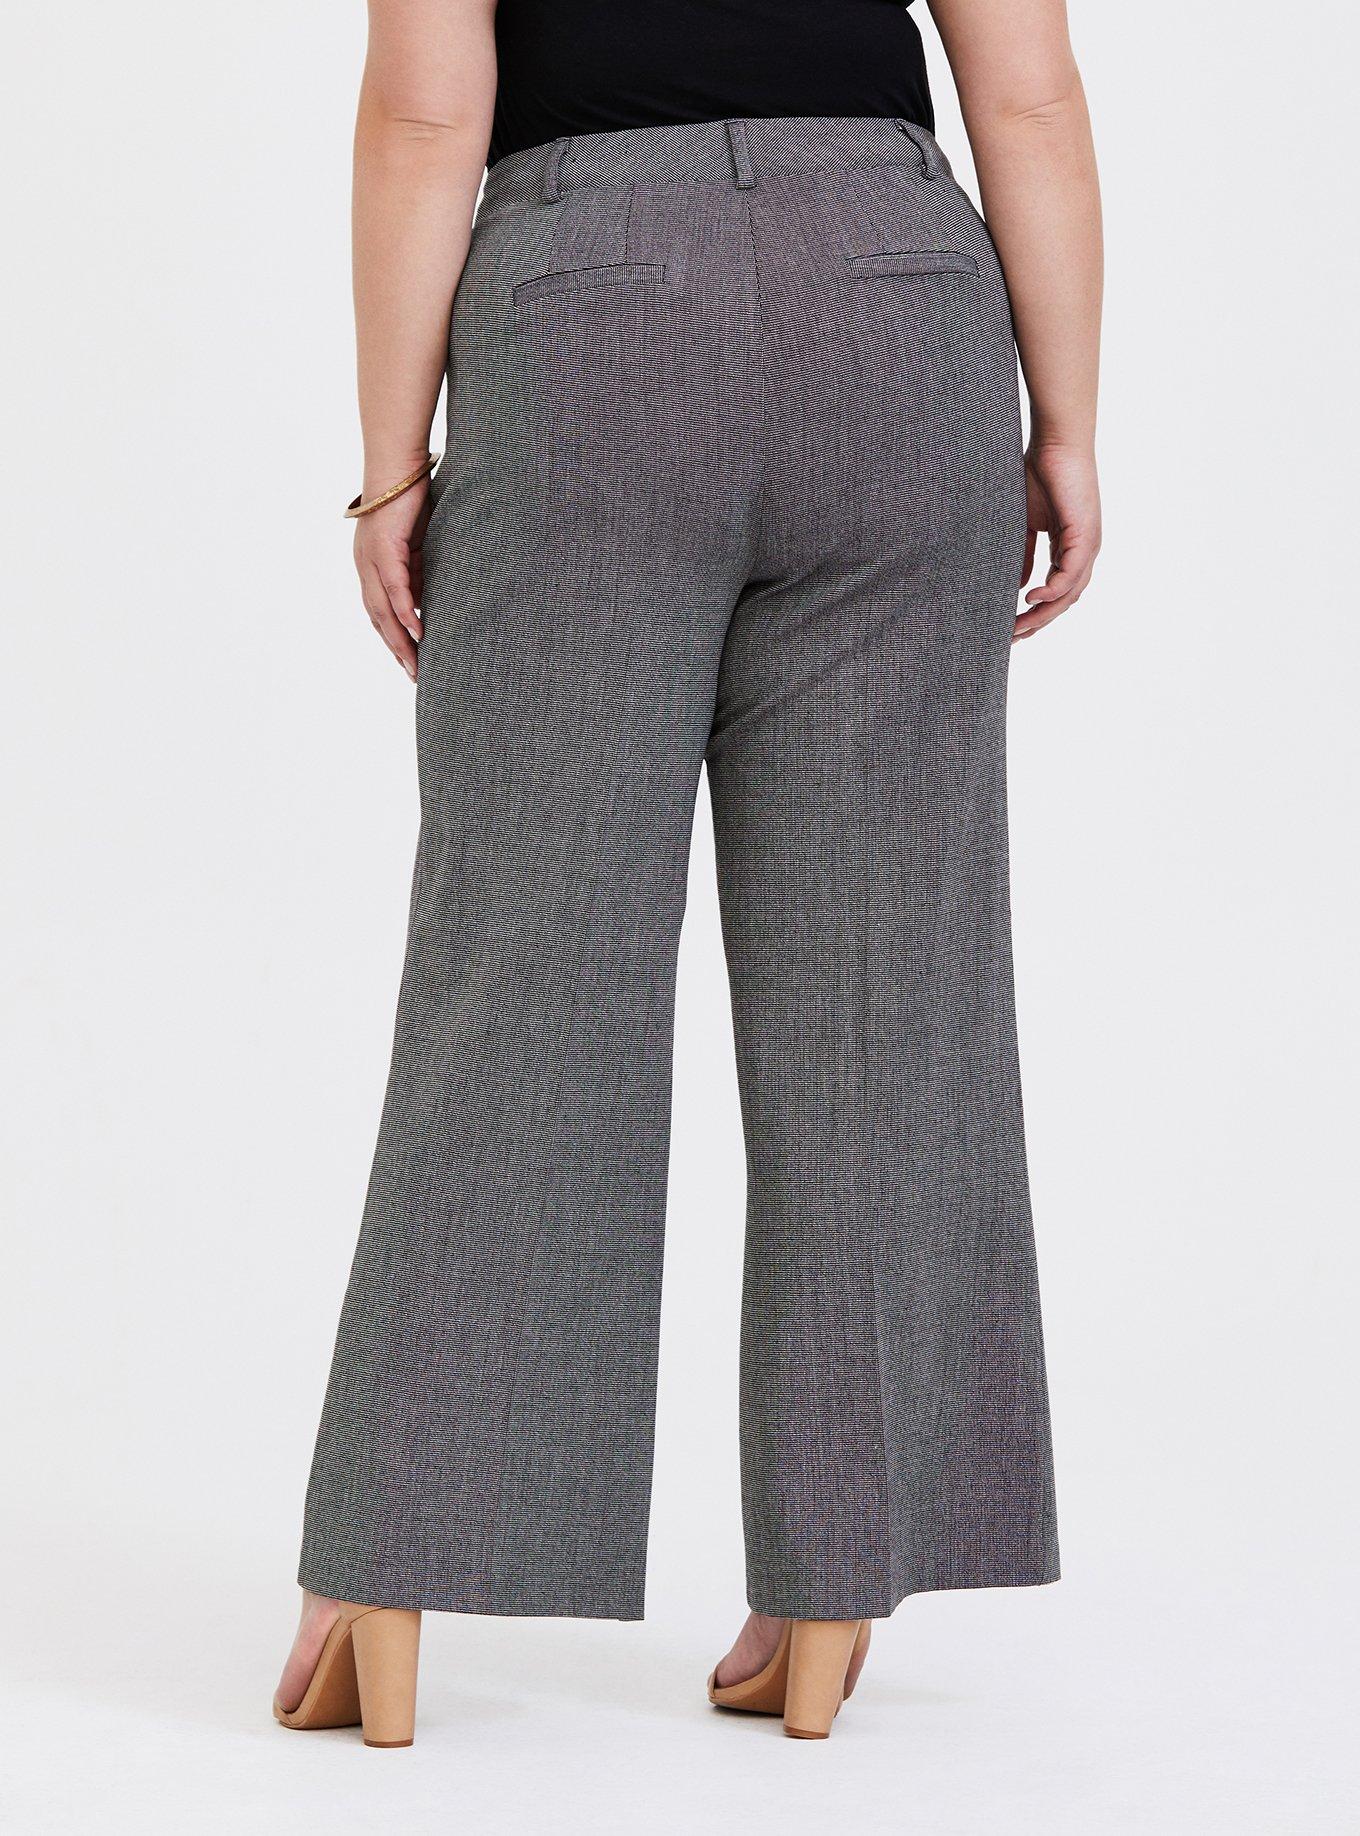 Plus Size - Grey Textured Structured Wide Leg Pant - Torrid